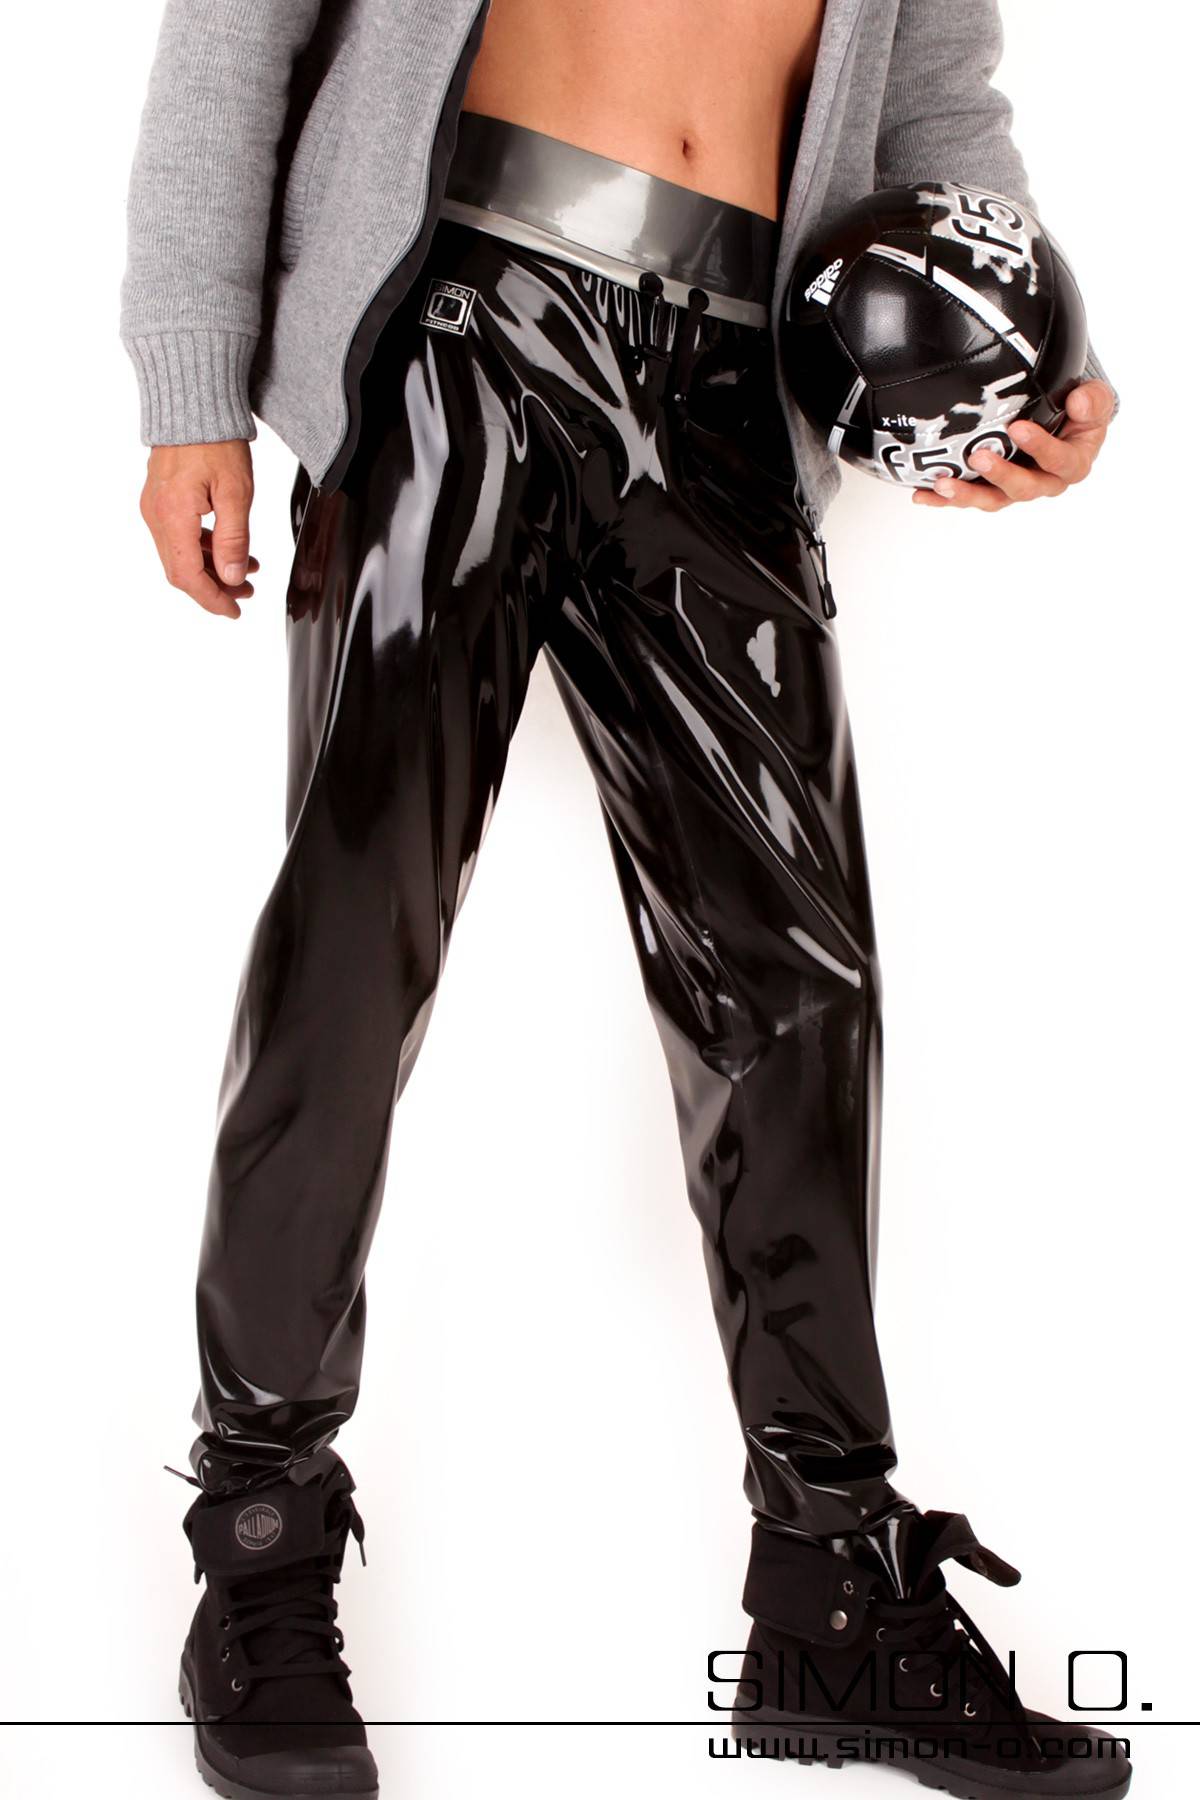 Black shiny latex jogging pants with waistband in contrast color anthracite